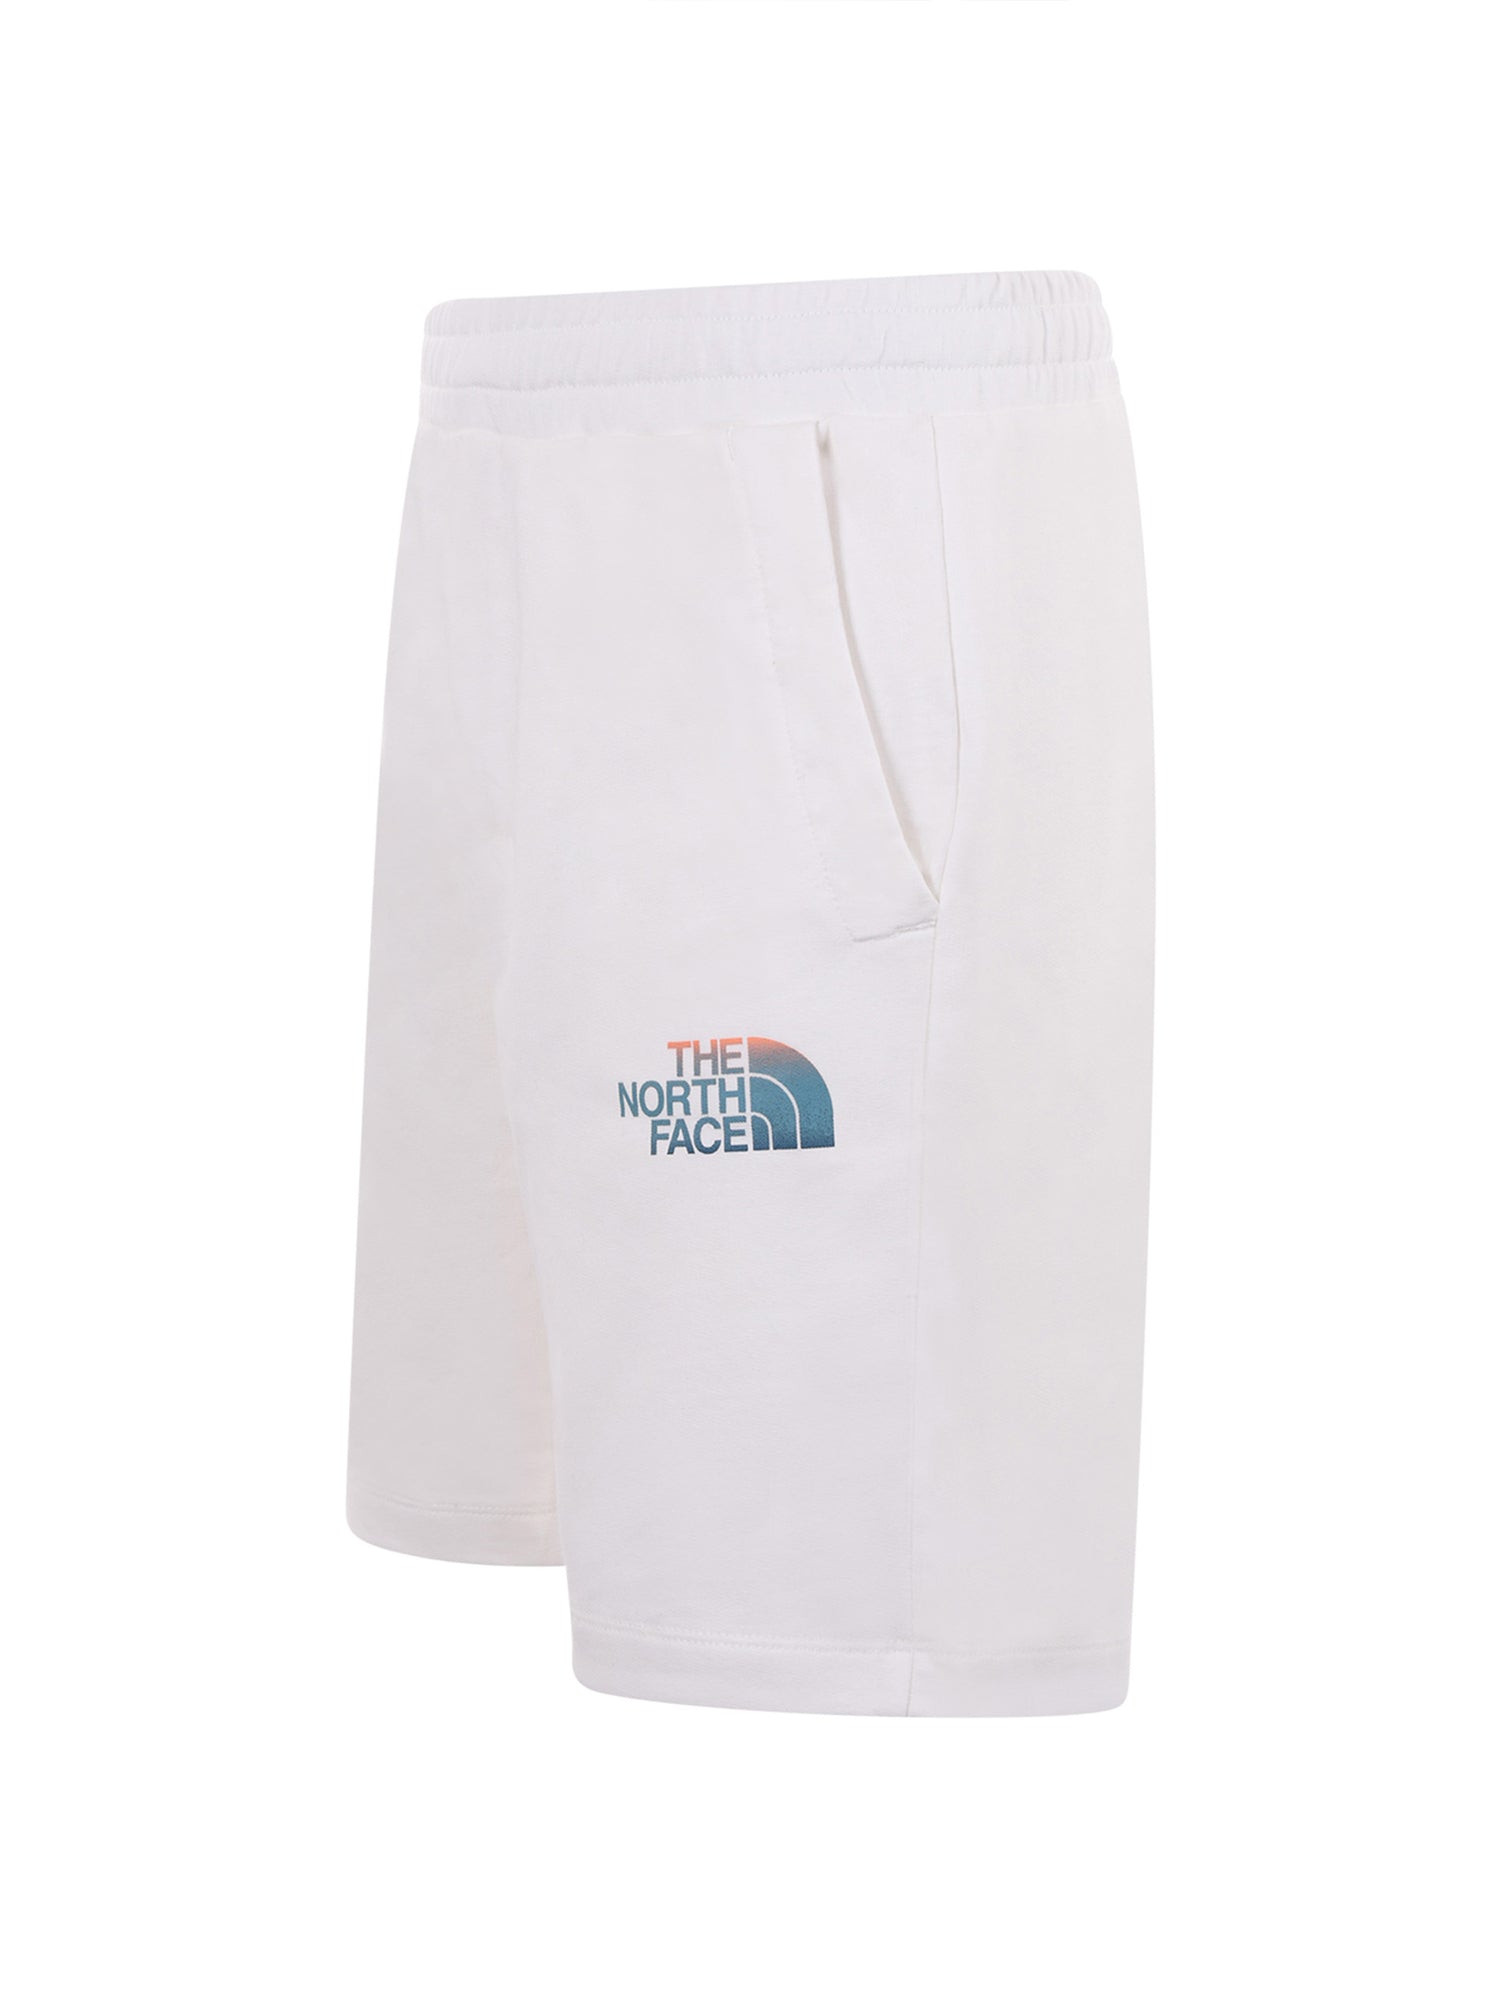 THE NORTH FACE SHORTS D2 GRAPHIC BIANCO